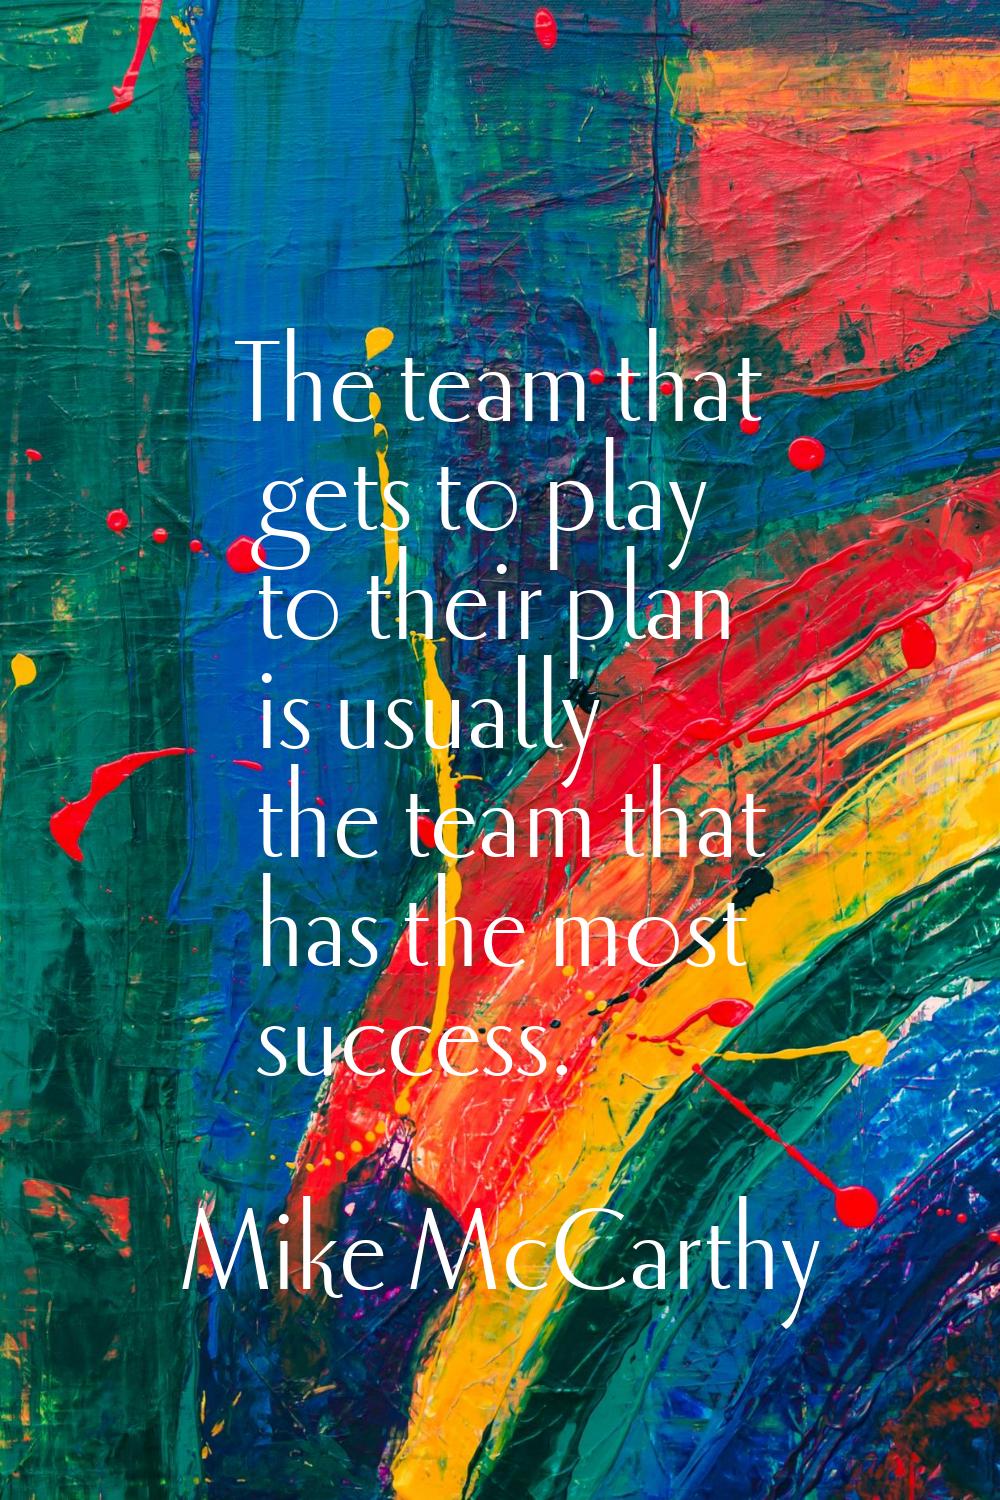 The team that gets to play to their plan is usually the team that has the most success.